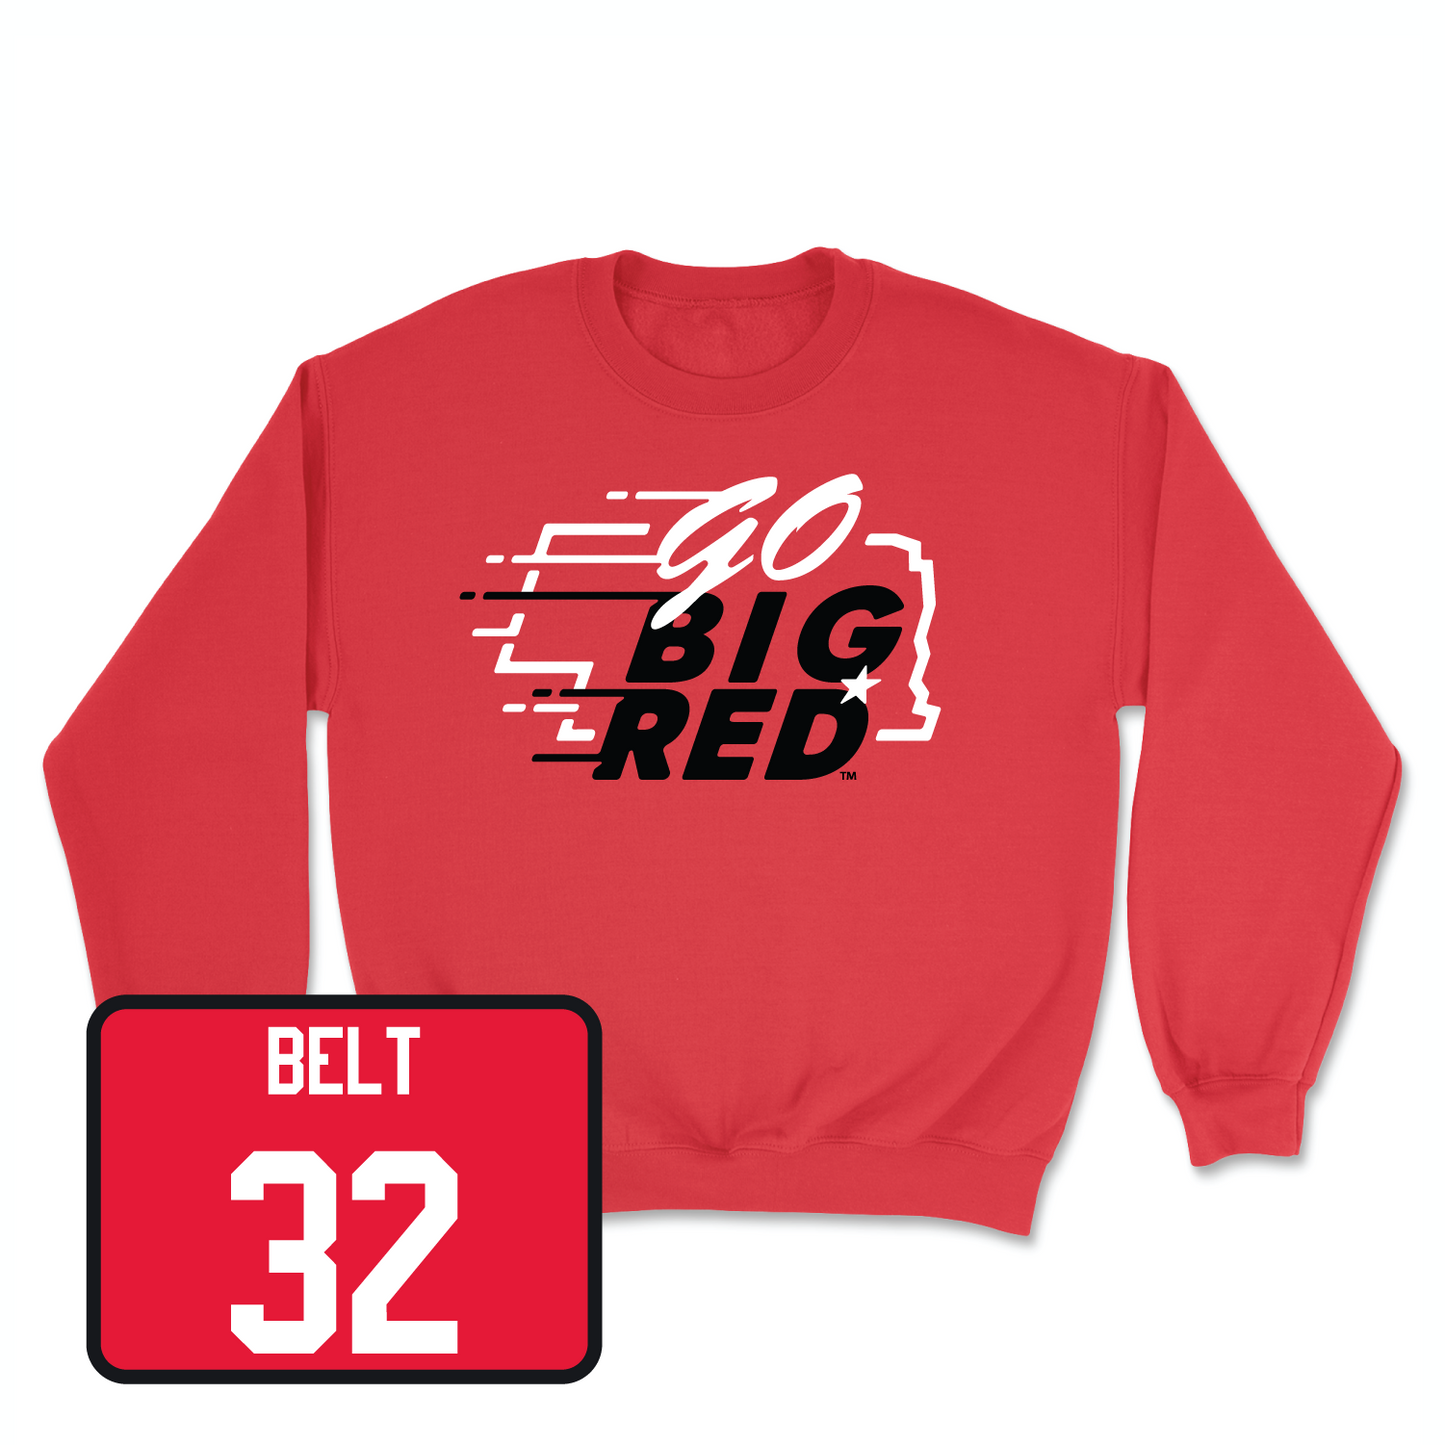 Red Football GBR Crew 4 Youth Small / Brody Belt | #32